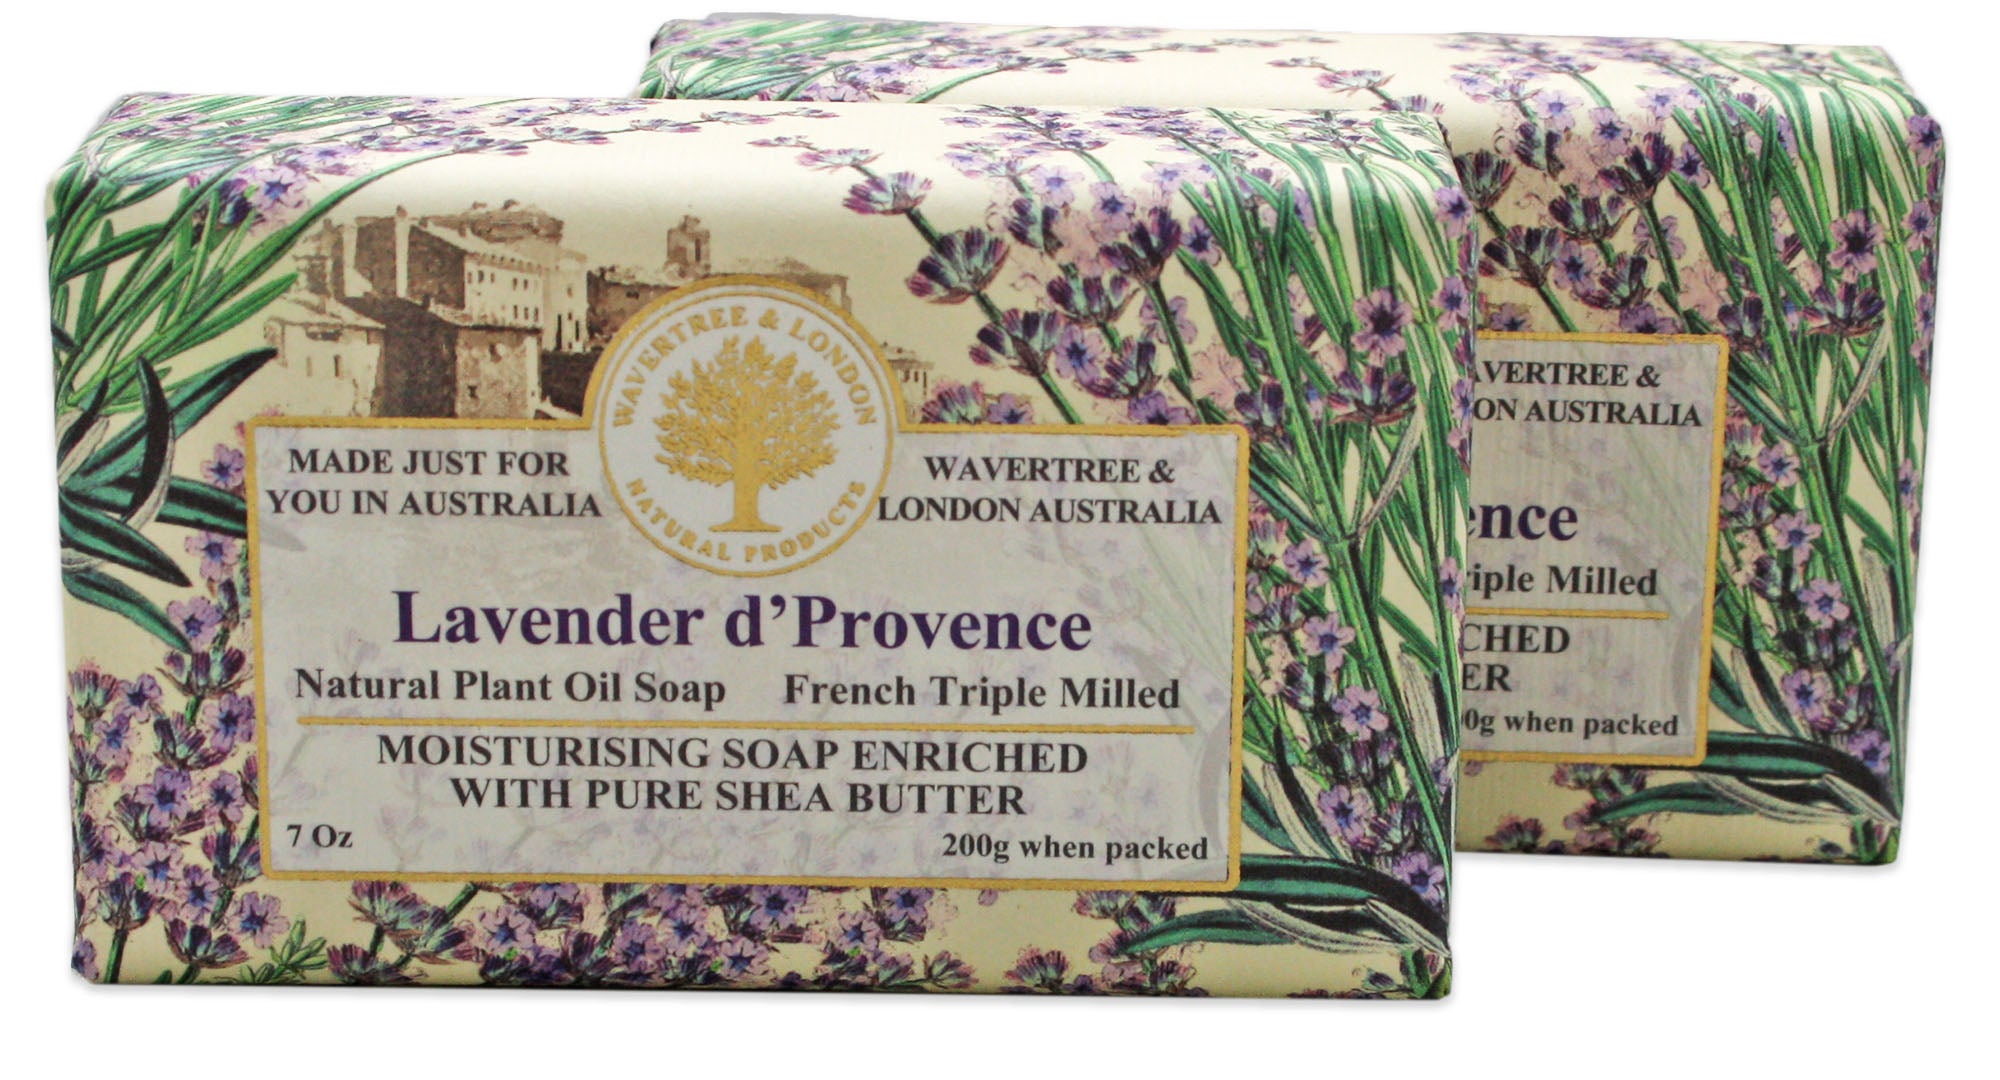 Wavertree & London Lavender d Provence (2 Bars), 7oz Moisturizing Natural Soap Bar, French -Milled and enriched with Shea Butter